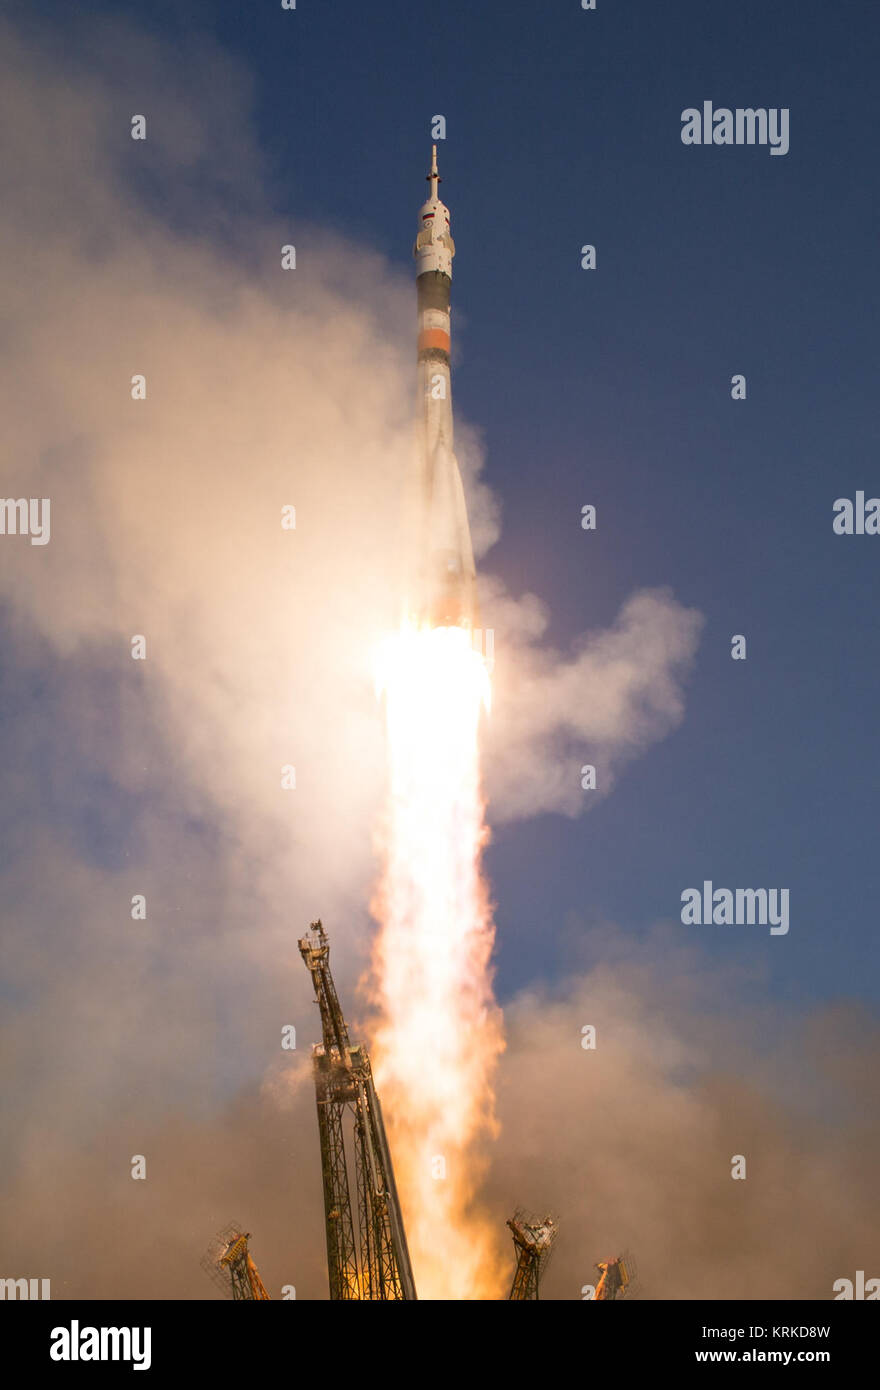 The Soyuz TMA-19M rocket is launched with Expedition 46 Soyuz Commander Yuri Malenchenko of the Russian Federal Space Agency (Roscosmos), Flight Engineer Tim Kopra of NASA, and Flight Engineer Tim Peake of ESA (European Space Agency), Tuesday, Dec. 15, 2015 at the Baikonur Cosmodrome in Kazakhstan.  Malenchenko, Kopra, and Peake will spend the next six-months living and working aboard the International Space Station.  Photo Credit: (NASA/Joel Kowsky) Expedition 46 Launch (NHQ201512150022) Stock Photo